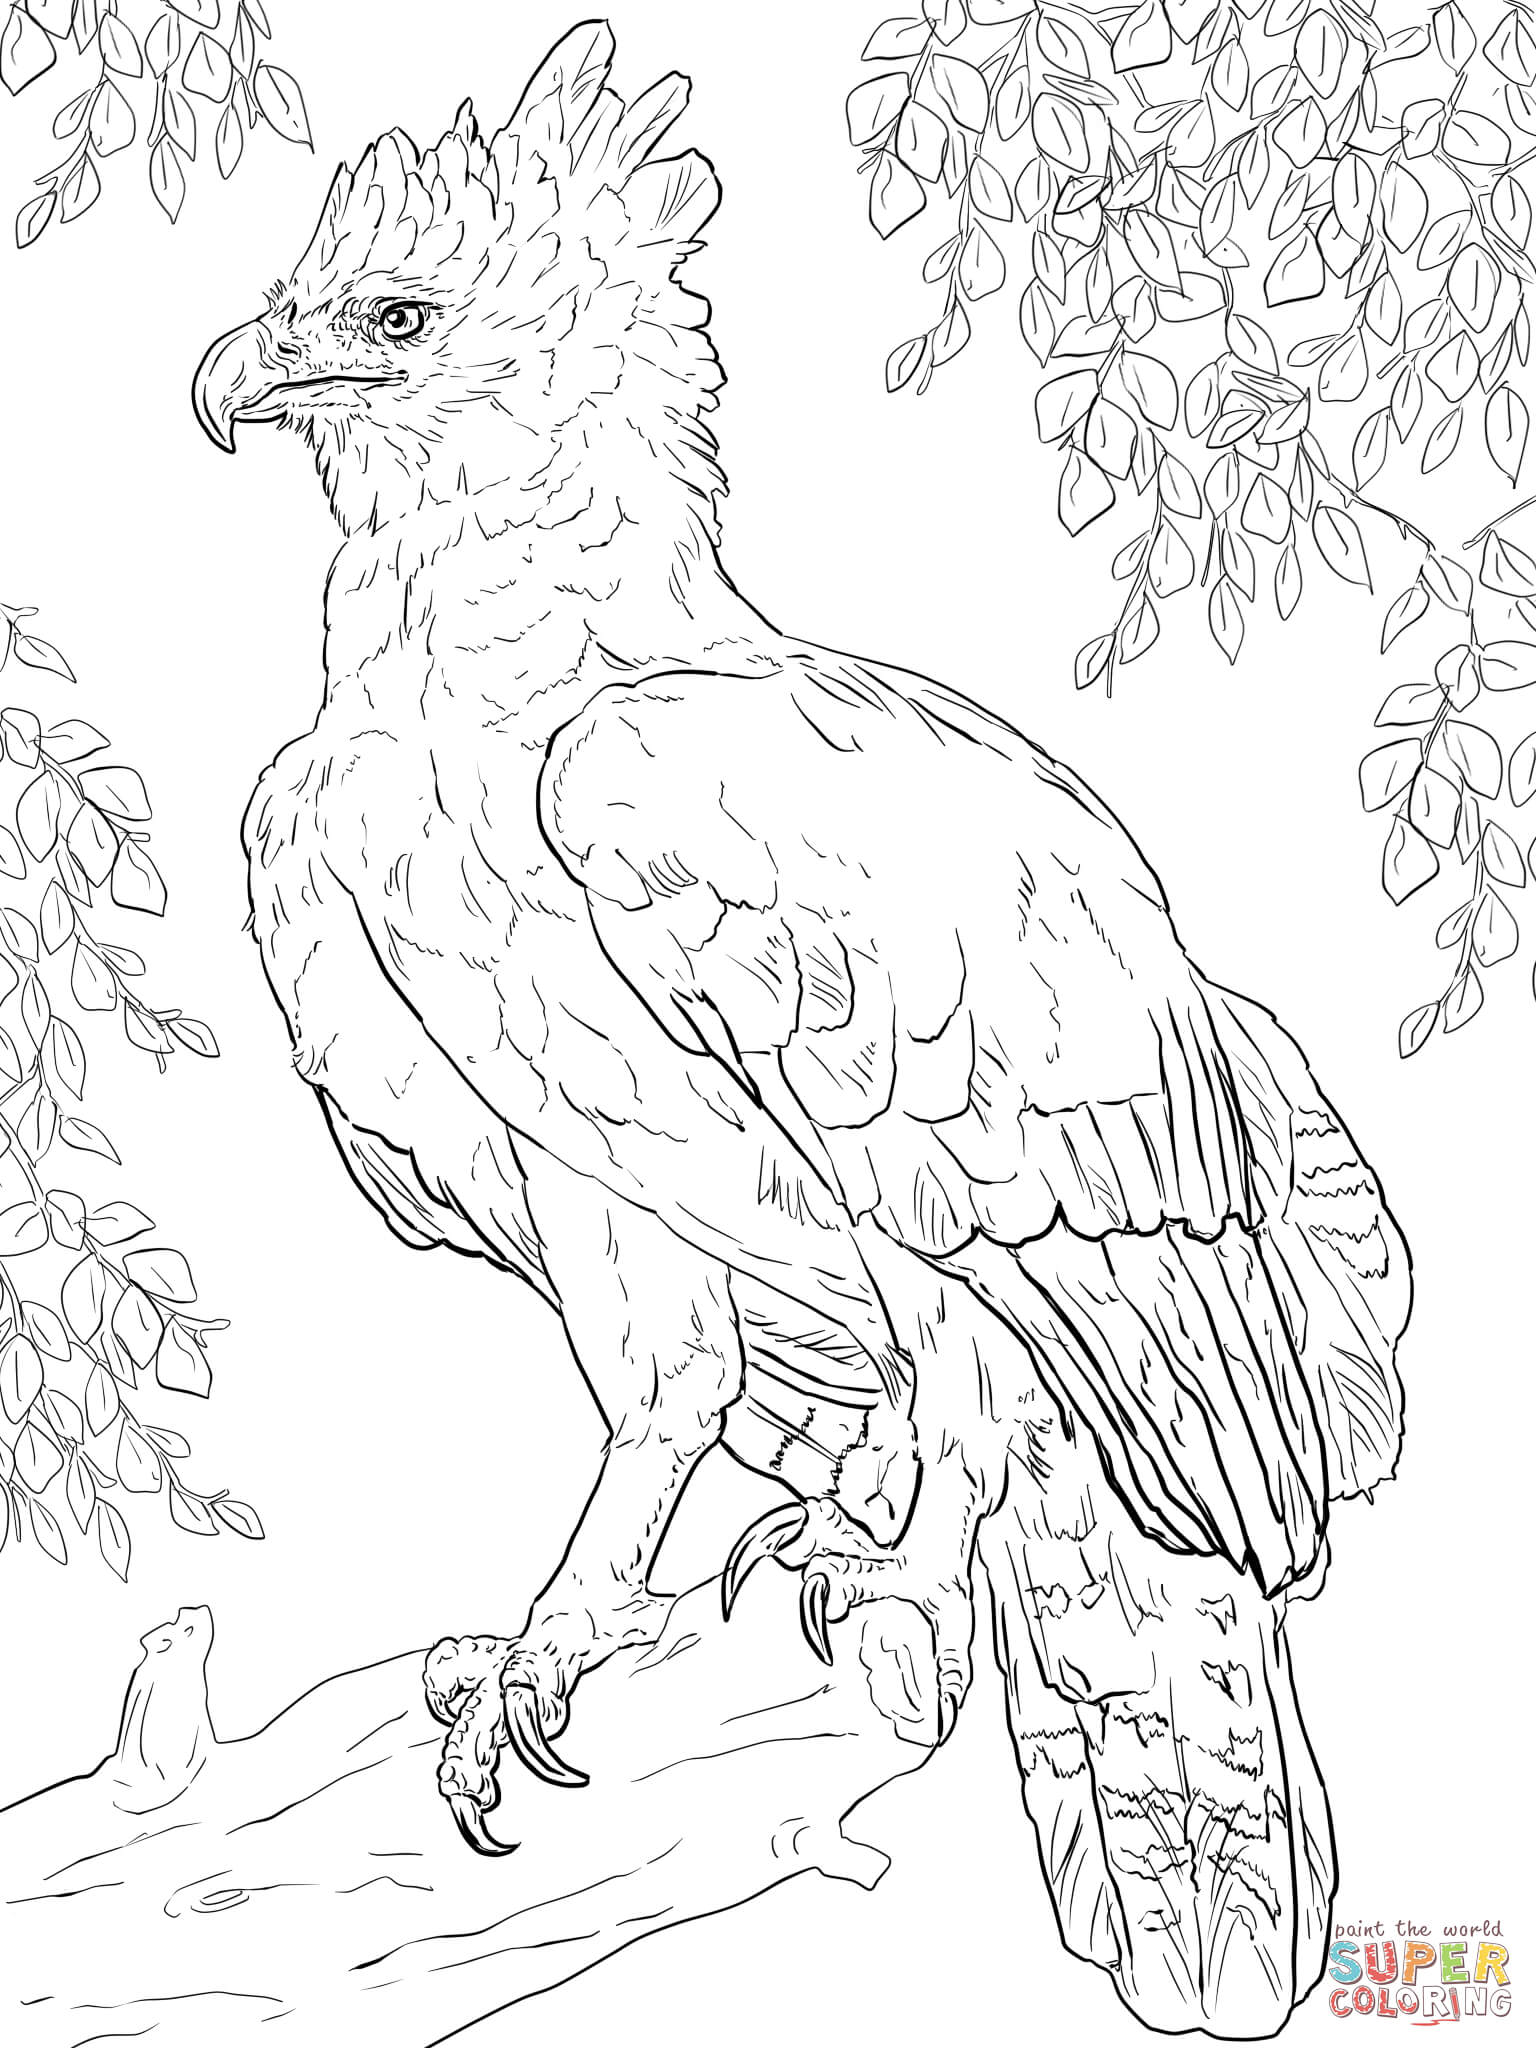 Harpy Eagle coloring #9, Download drawings